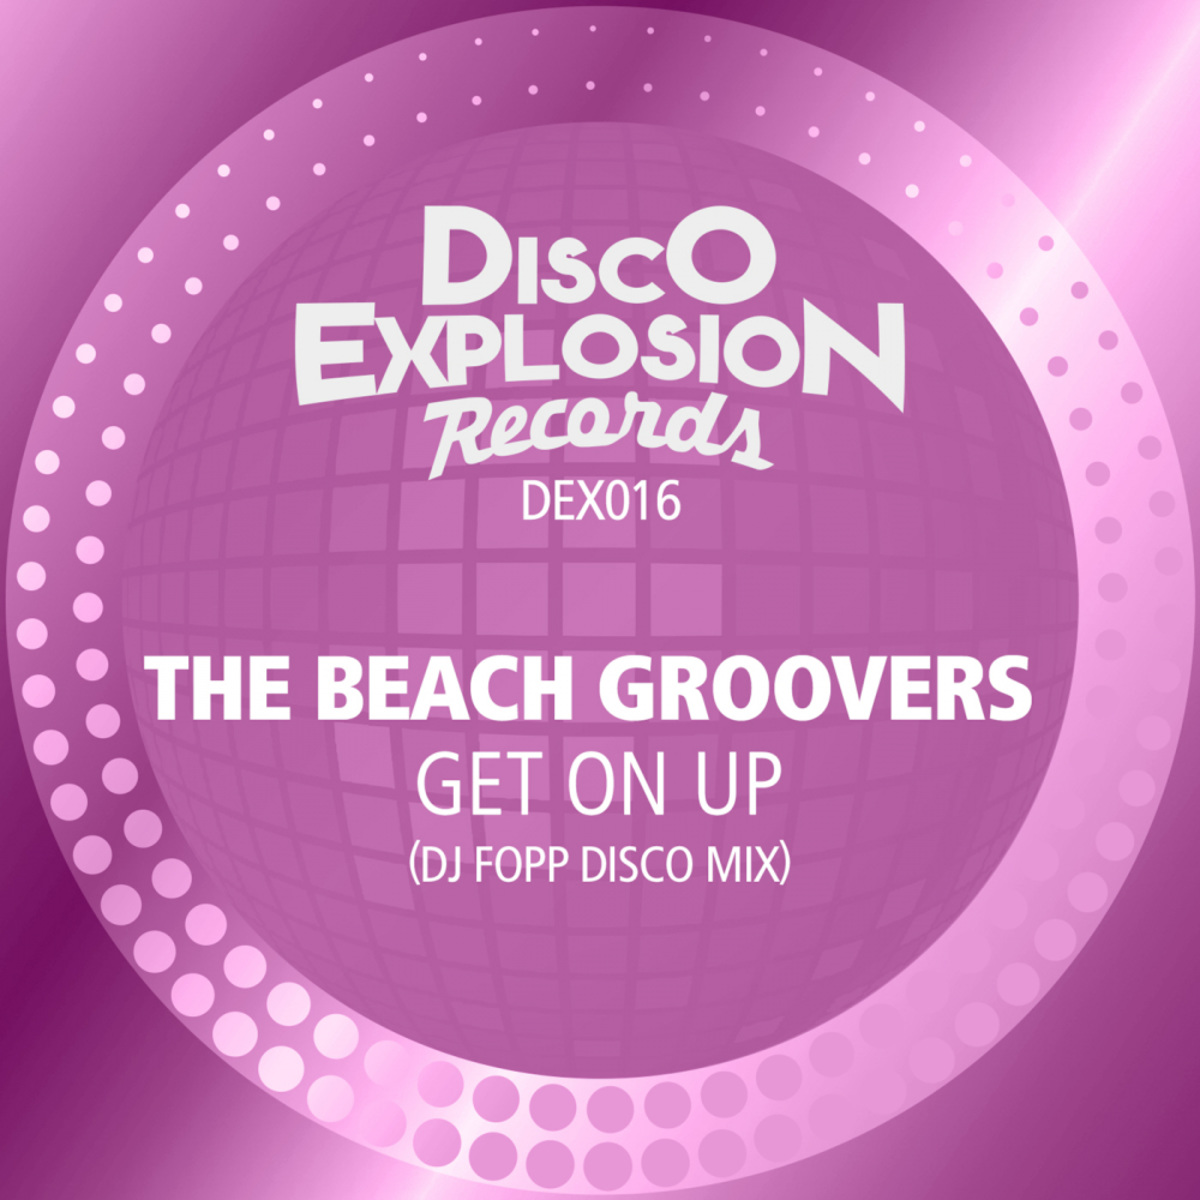 The Beach Groovers - Get On Up (DJ Fopp Disco Mix) / Disco Explosion Records